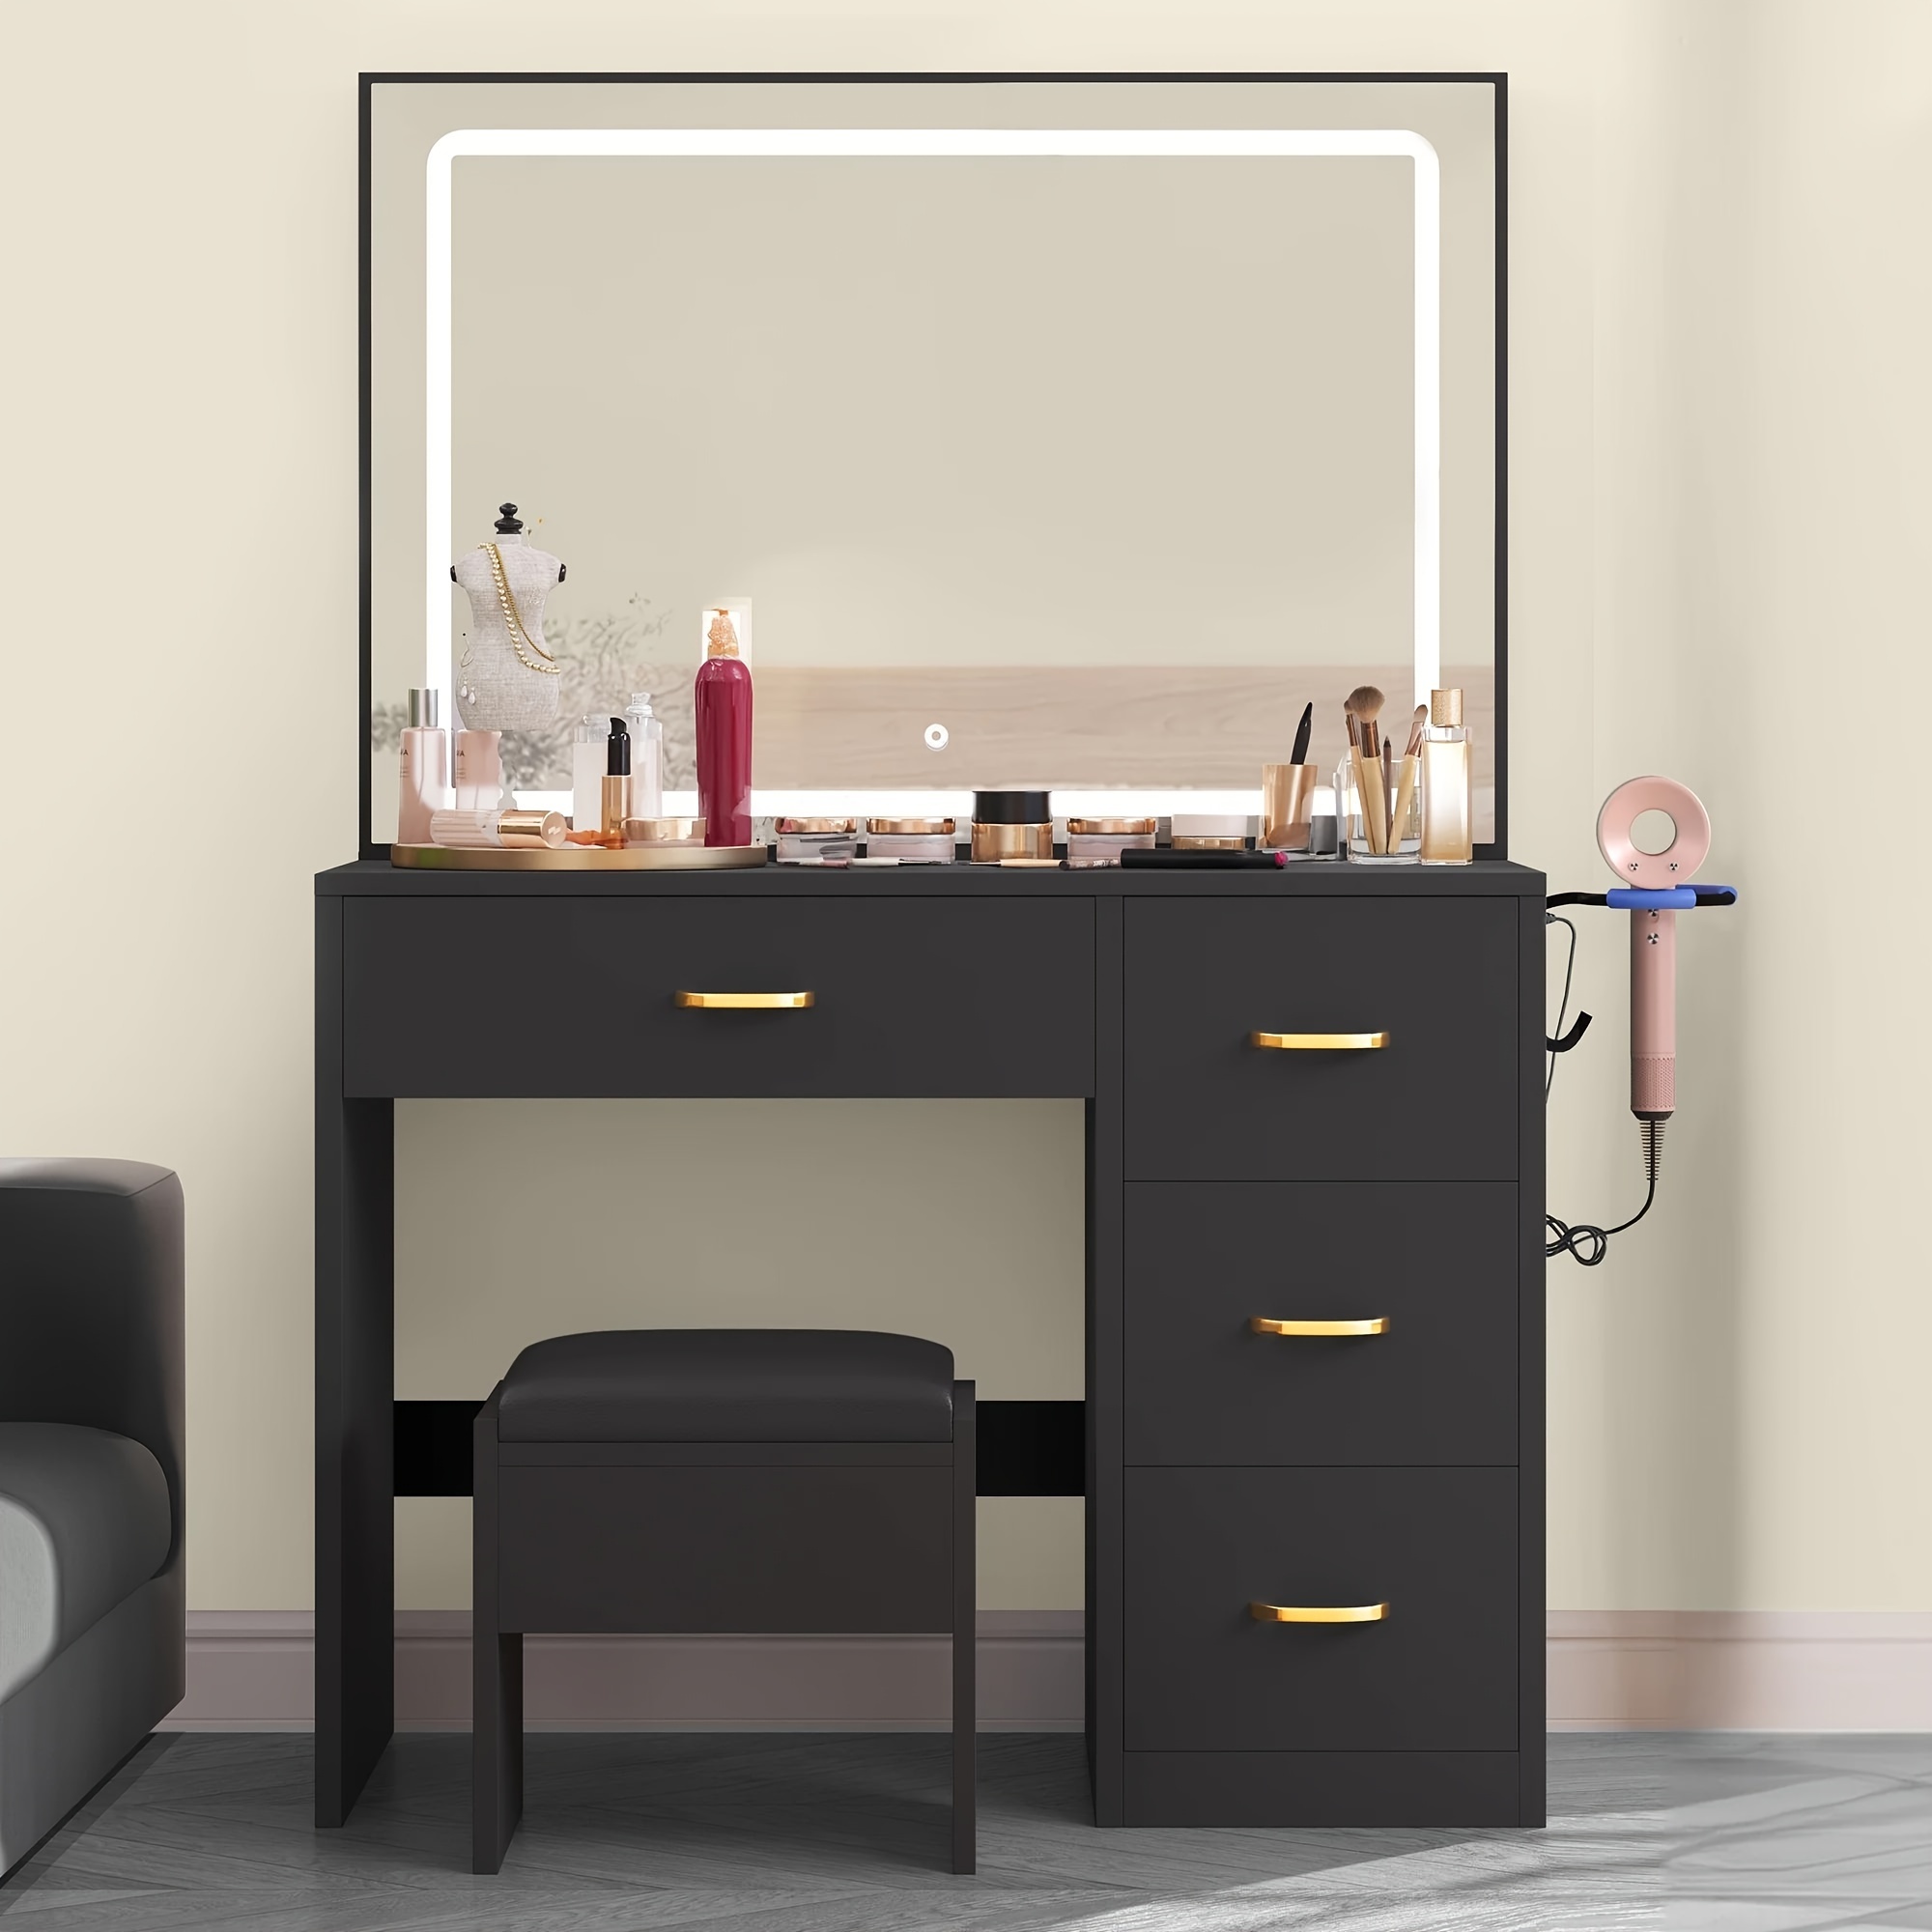 

Dwvo Makeup Vanity Desk With Large Lighted Mirror And Storage - Enhance Your Beauty, Routine 4 Drawer Vanity Table With Cushioned Stool, Black